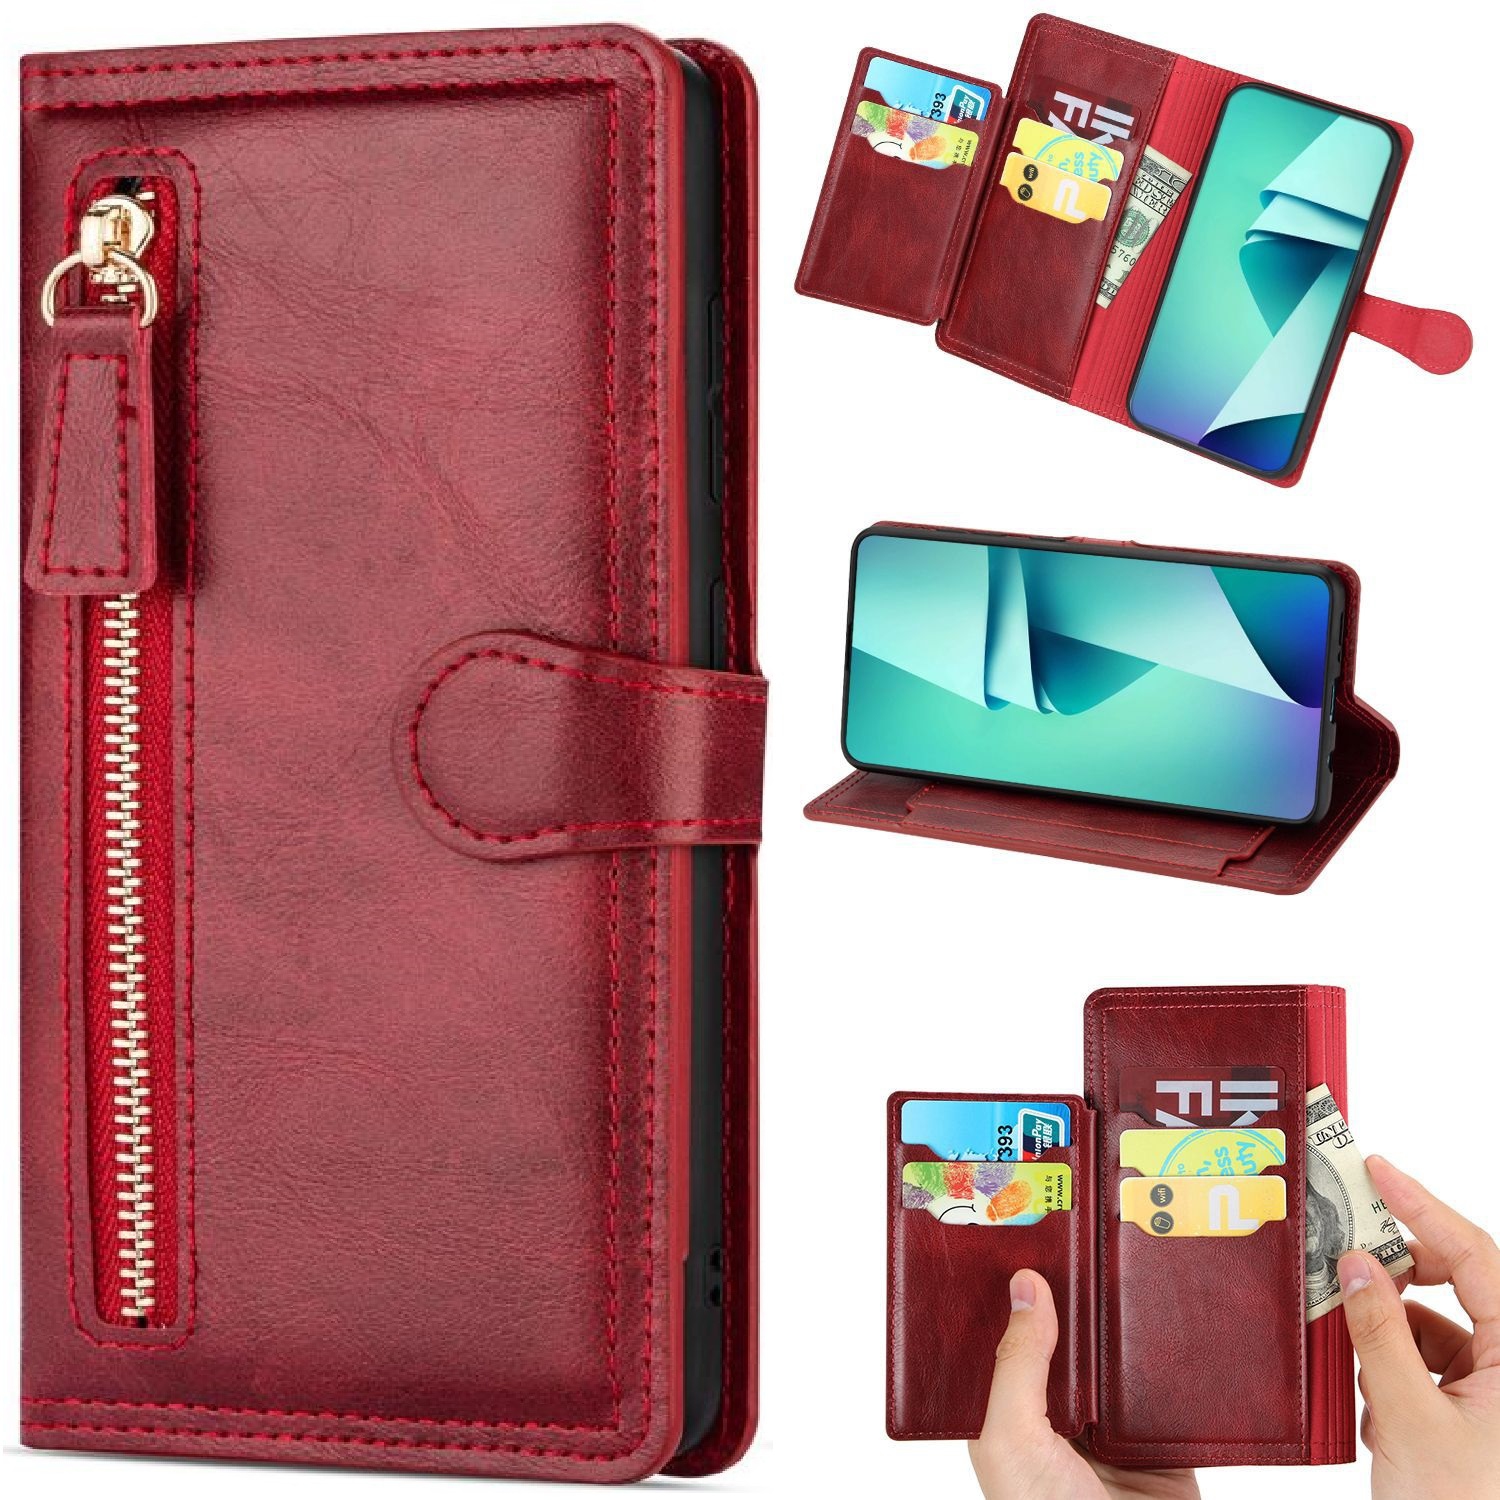 PIERO Leather Zipper Wallet Case Flip Card Holder Stand Phone Cover Premium Leather Flip Cover for Samsung Galaxy S22 ULTRA -Red (FREE SHIPPING)